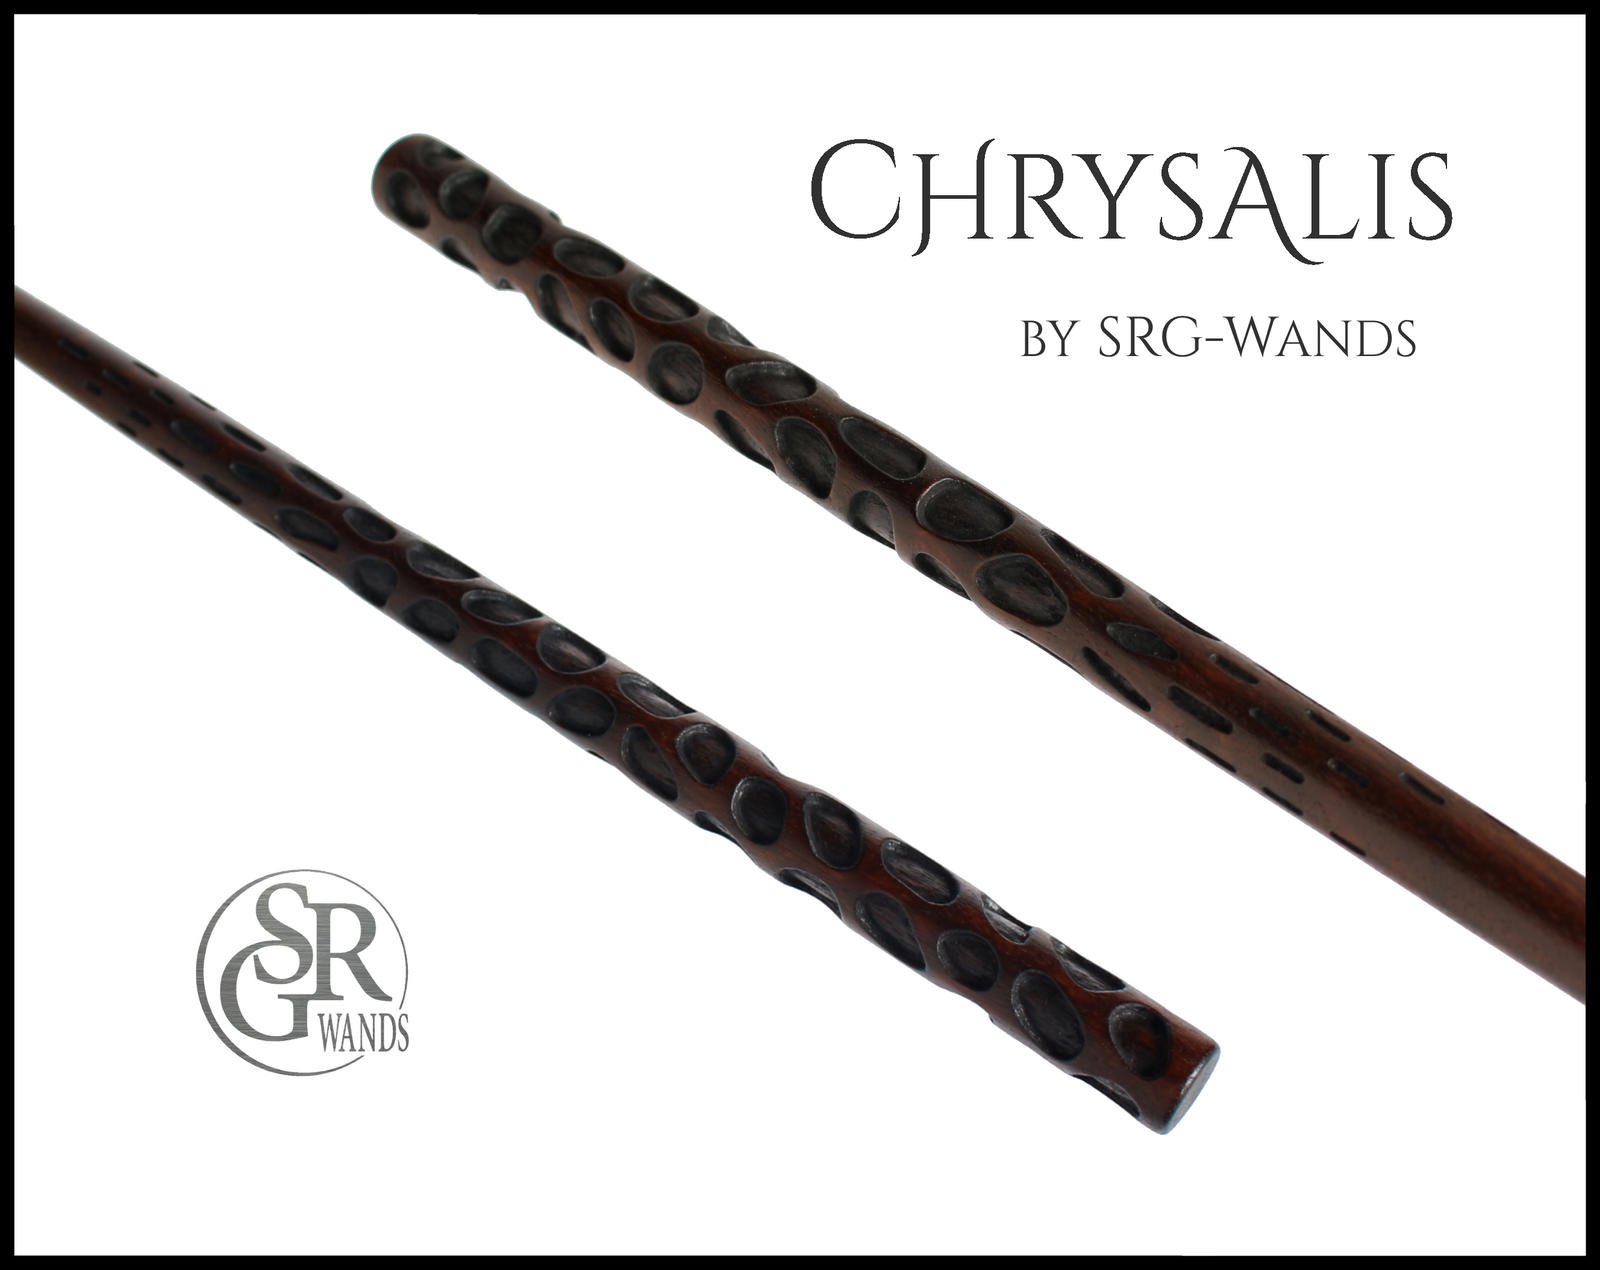 Chrysalis - The Wand of Metamorphosis by SRG-Wands on DeviantArt